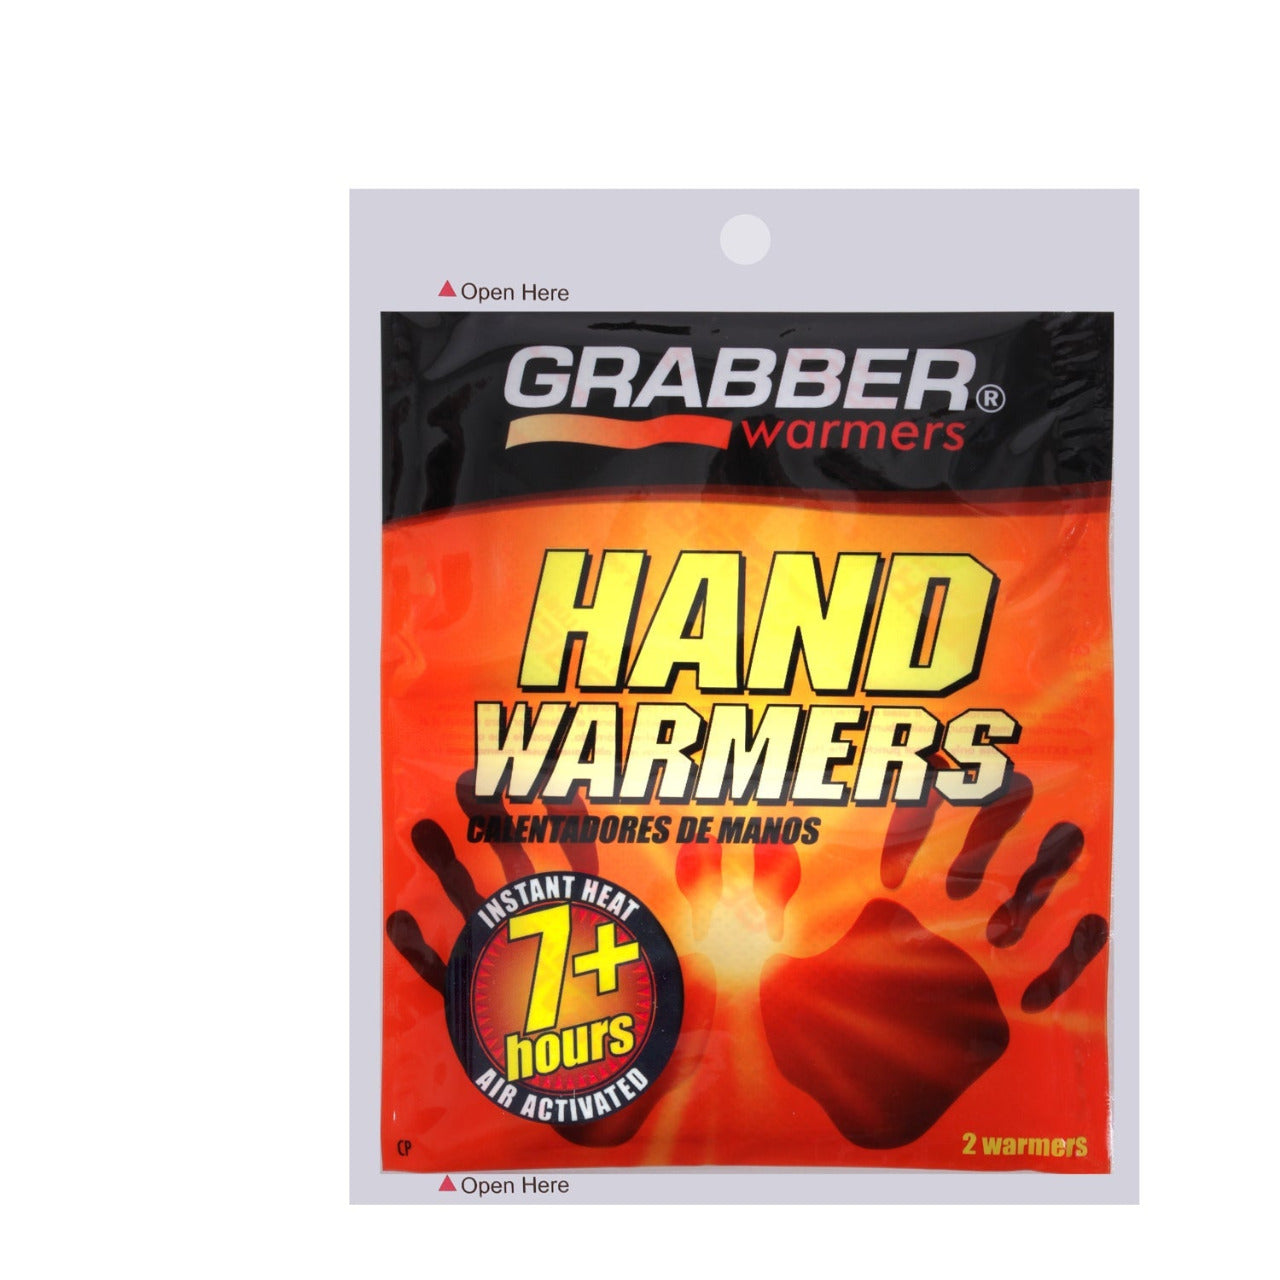 Grabber Hand Warmers are sold 2 per pack and provide 7+ hours of instant heat, perfect for sticking inside your gloves or pockets!